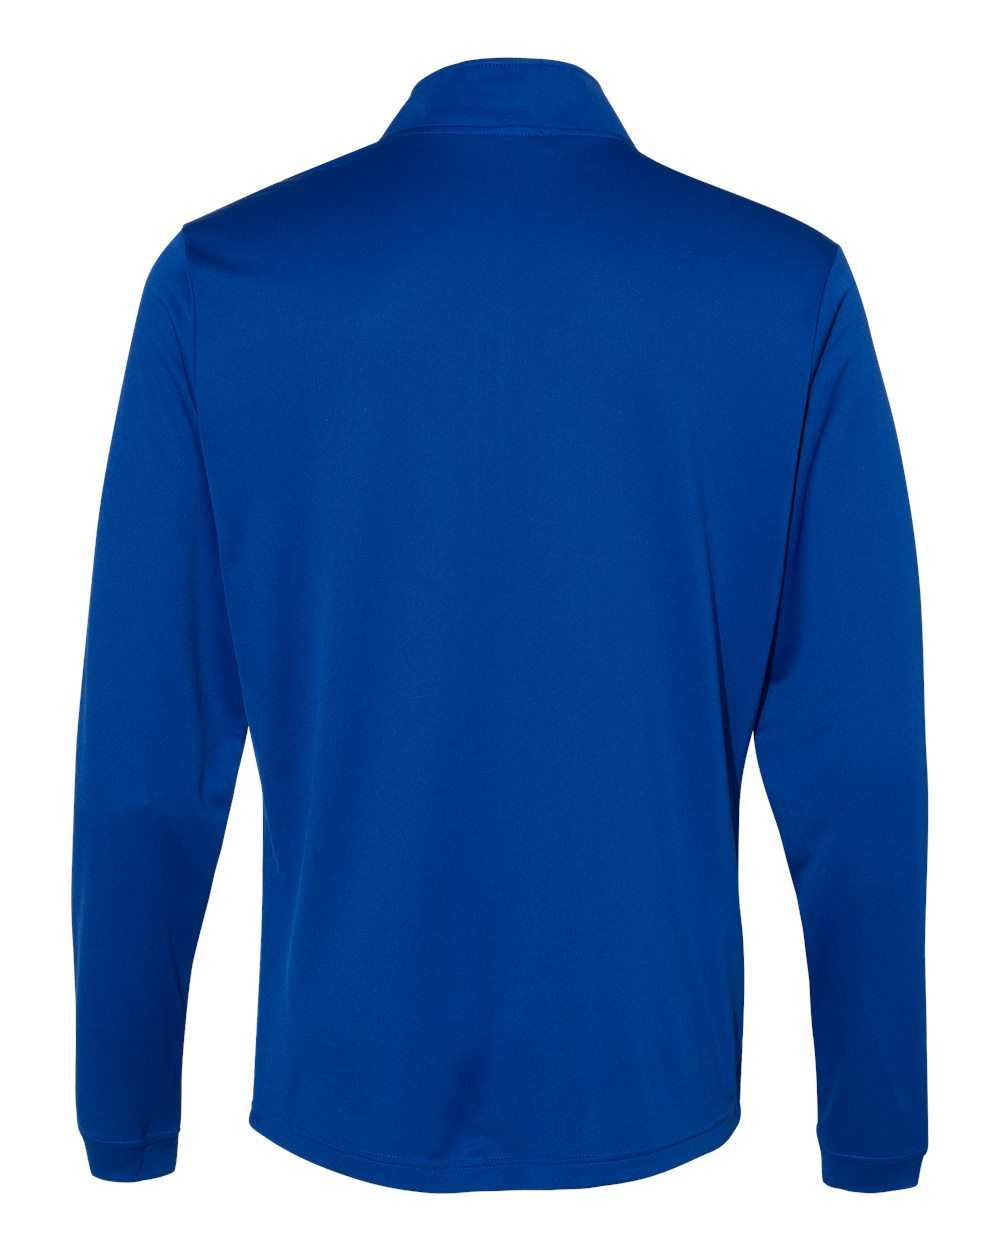 Adidas A401 Lightweight Quarter-Zip Pullover - Collegiate Royal - HIT a Double